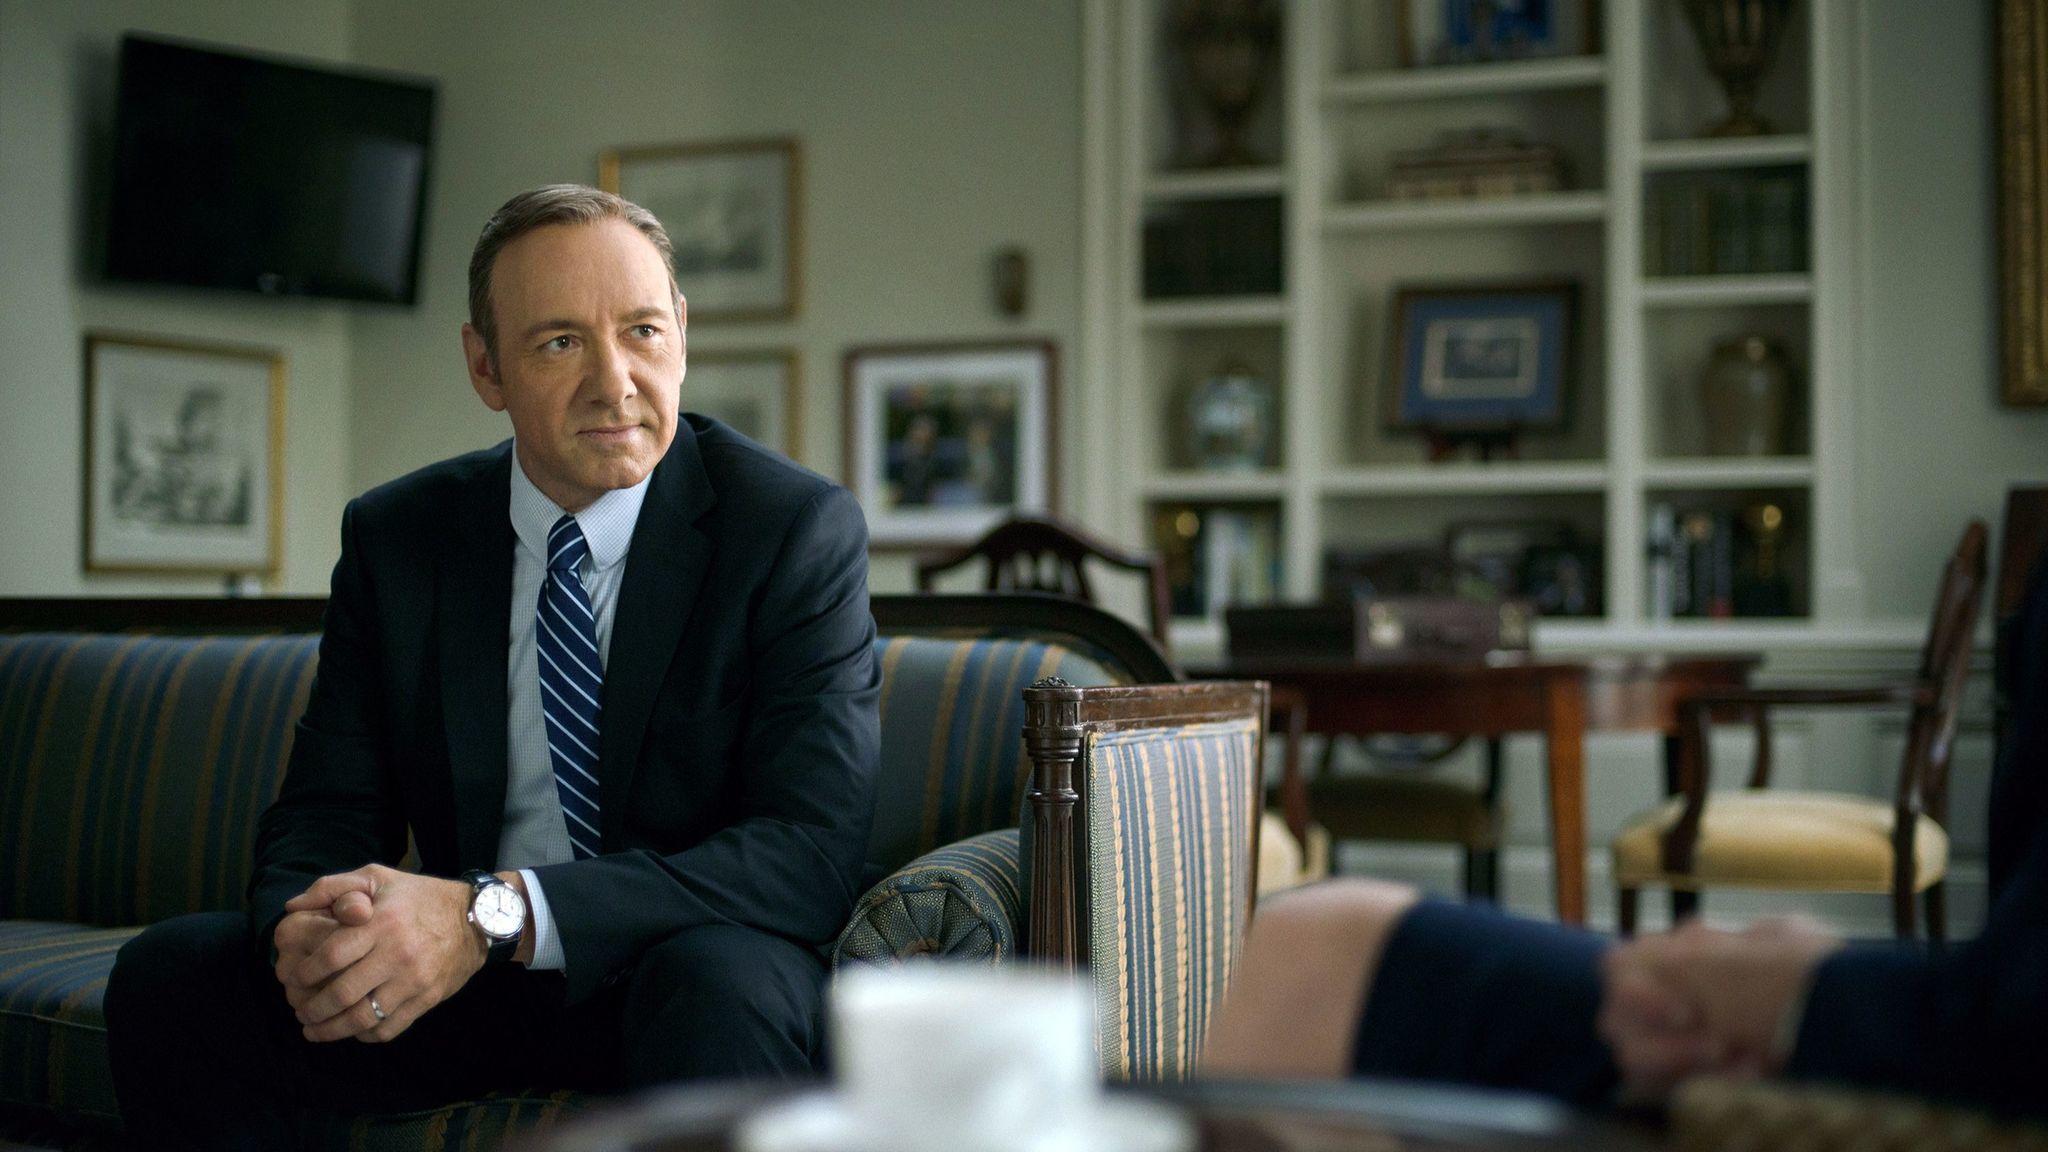 Amid Kevin Spacey fallout, 'House of Cards' to end with upcoming